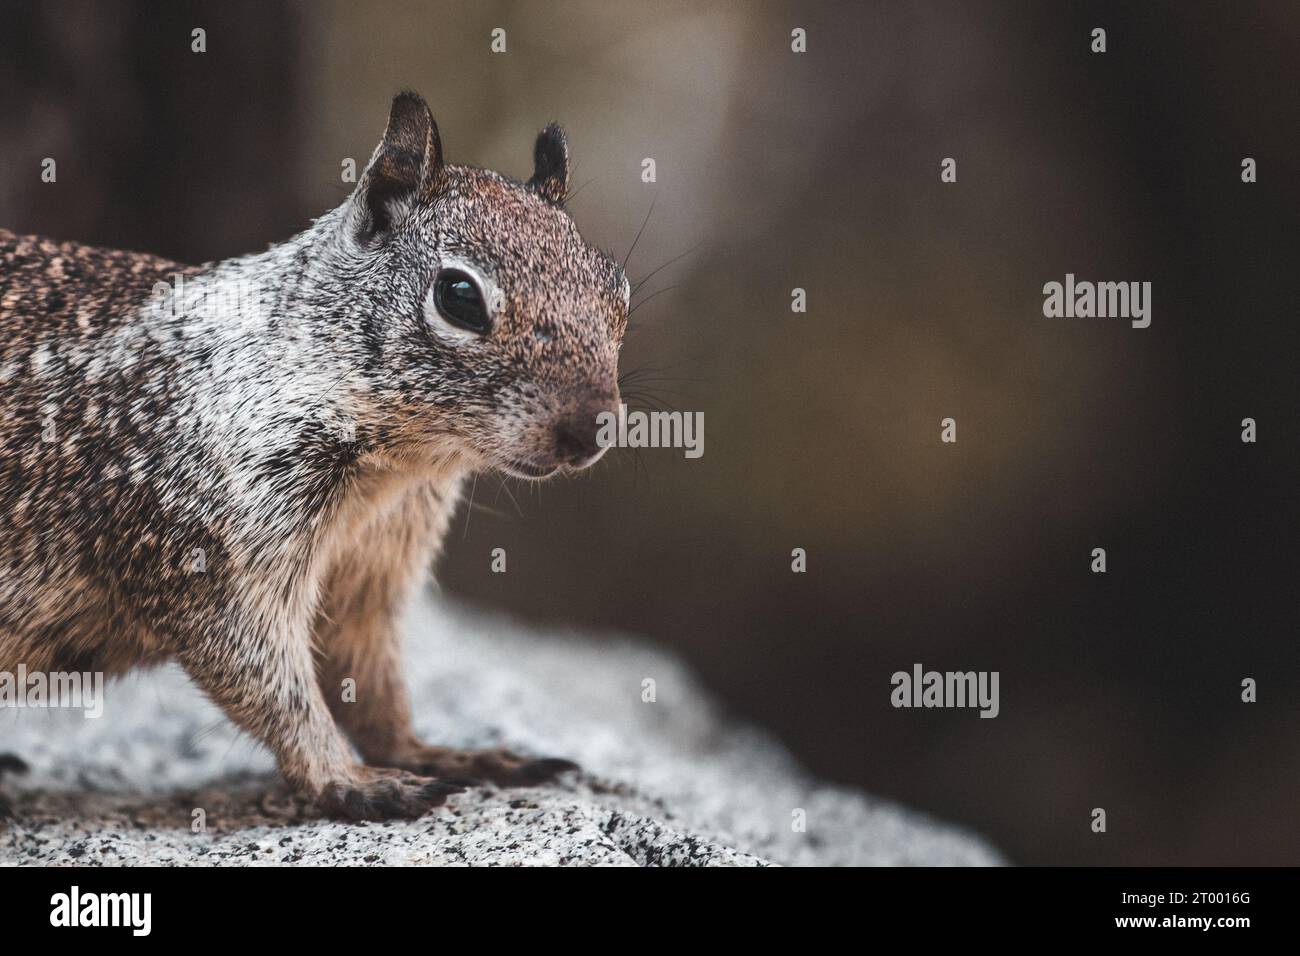 A closeup of a squirrel in the Dolomites, California, USA Stock Photo